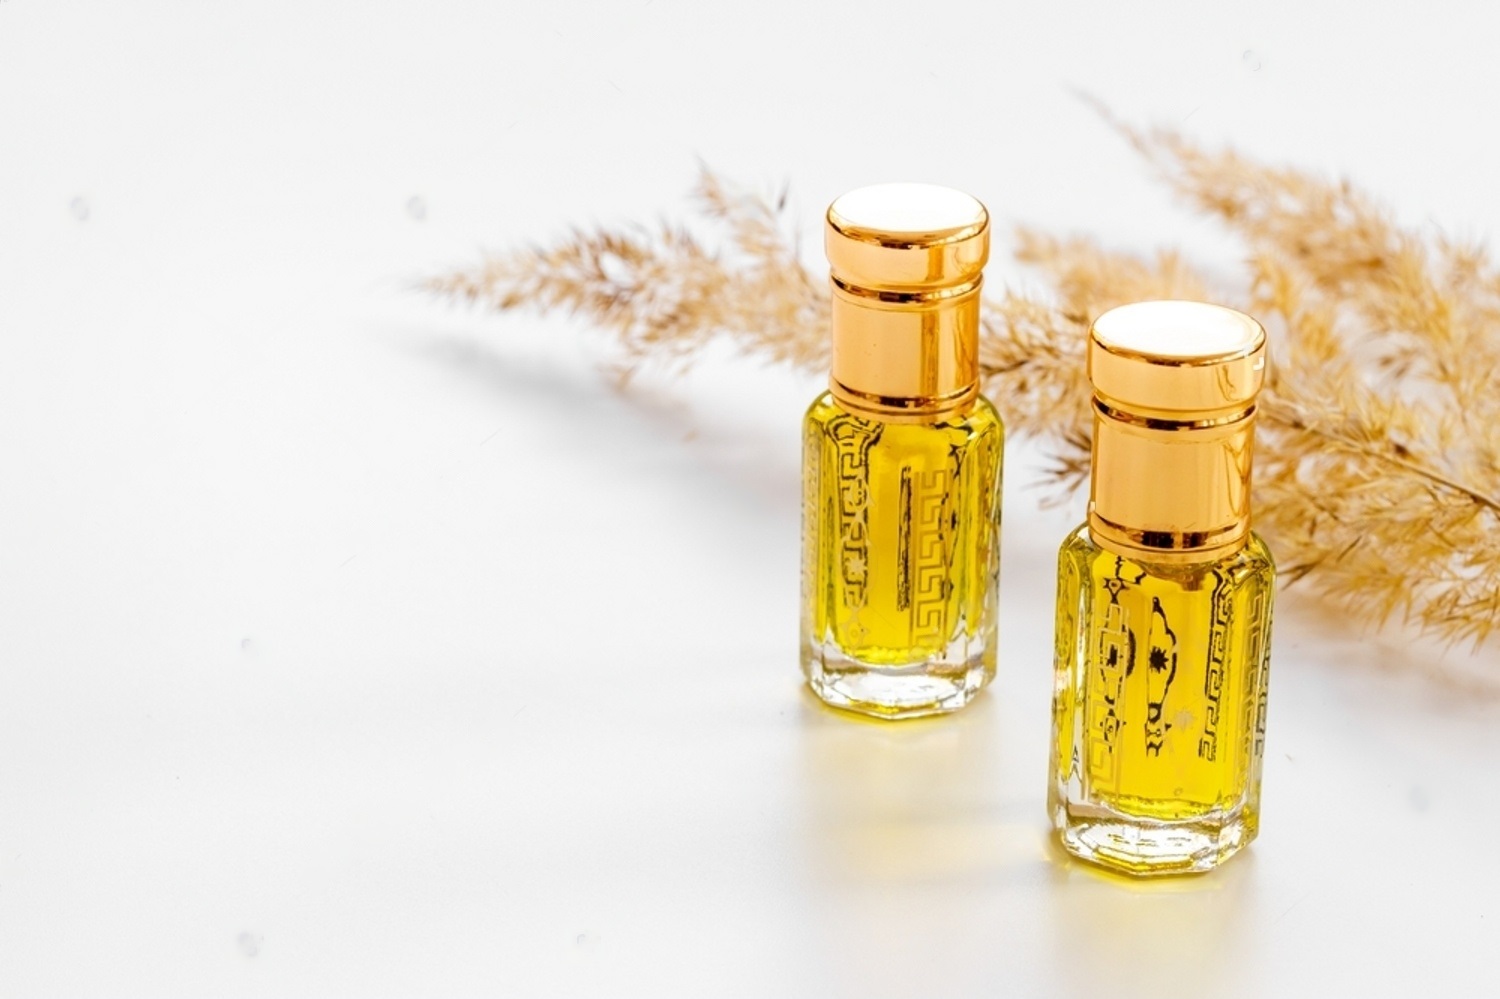 Oud and Fashion: How Arabian Scents Influence Runway Trends with Oud Perfume